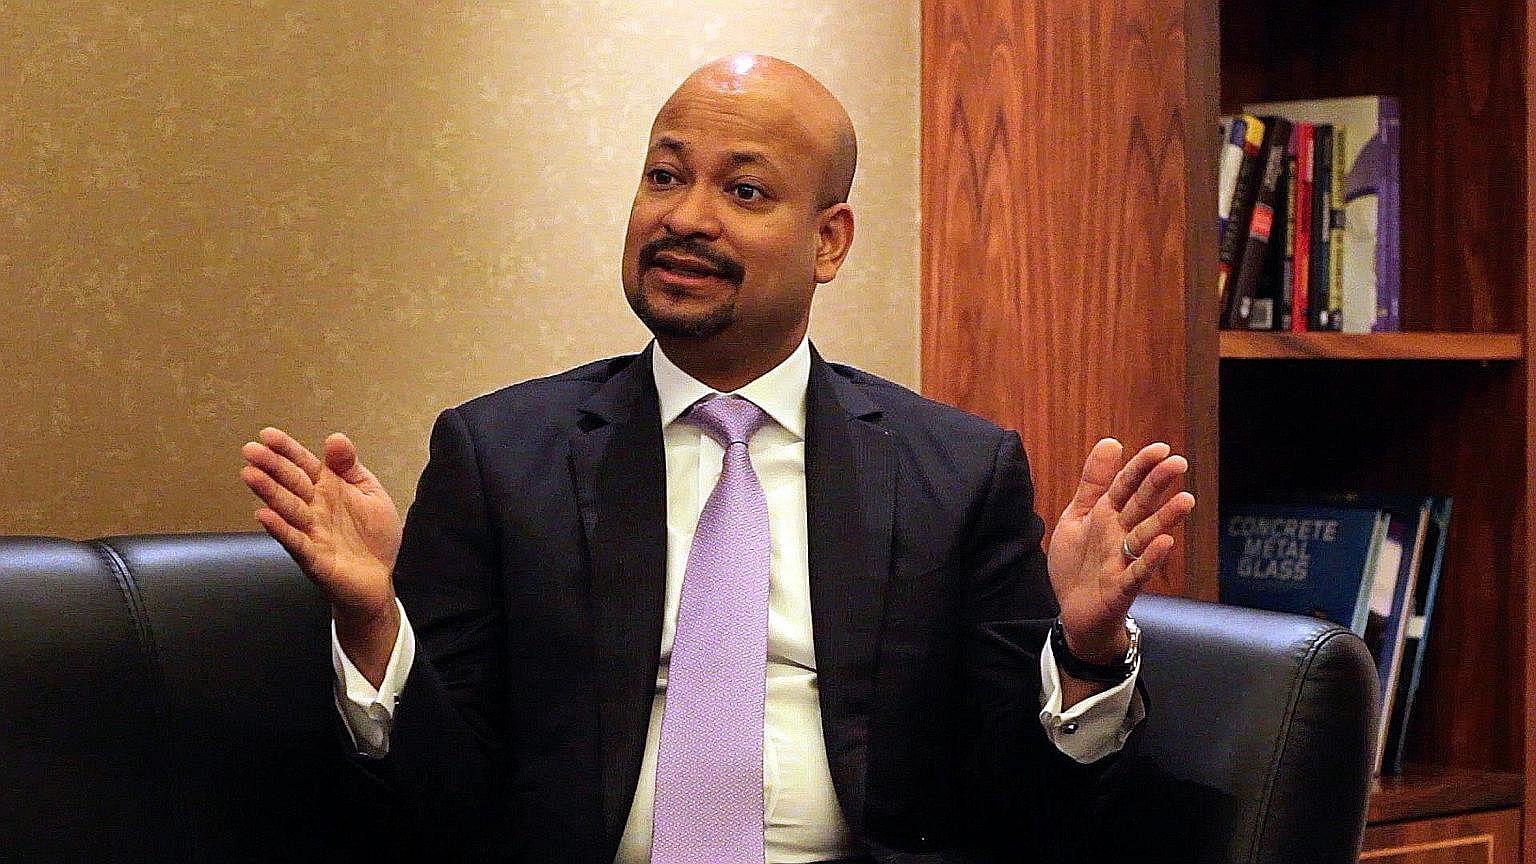 1MDB chief Arul Kanda personally oversaw the dry run for Prime Minister Najib Razak's visit to the Bandar Malaysia development last Tuesday, but the lavish party was scrapped after the deal was aborted last Wednesday.